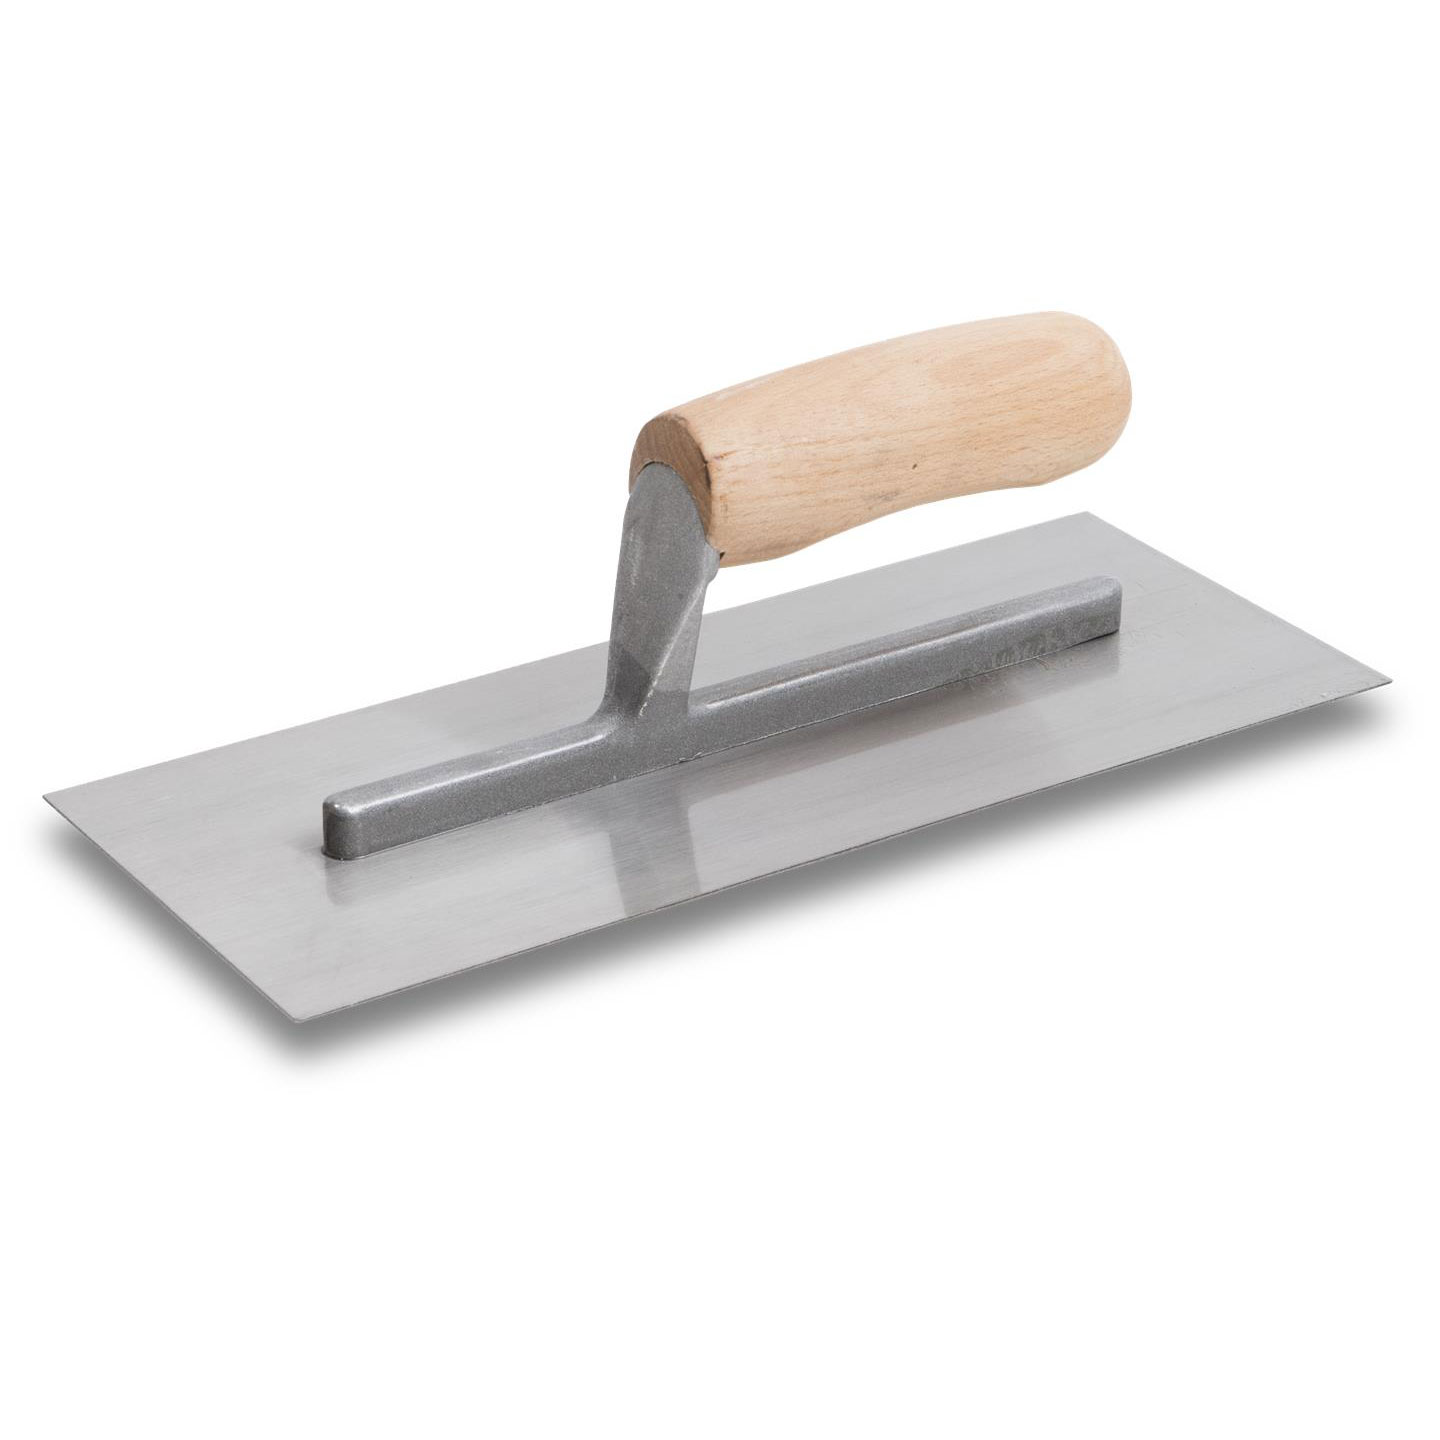 Marshalltown 994S 14in x 4in Finishing Trowel with Curved Wood Handle 994S